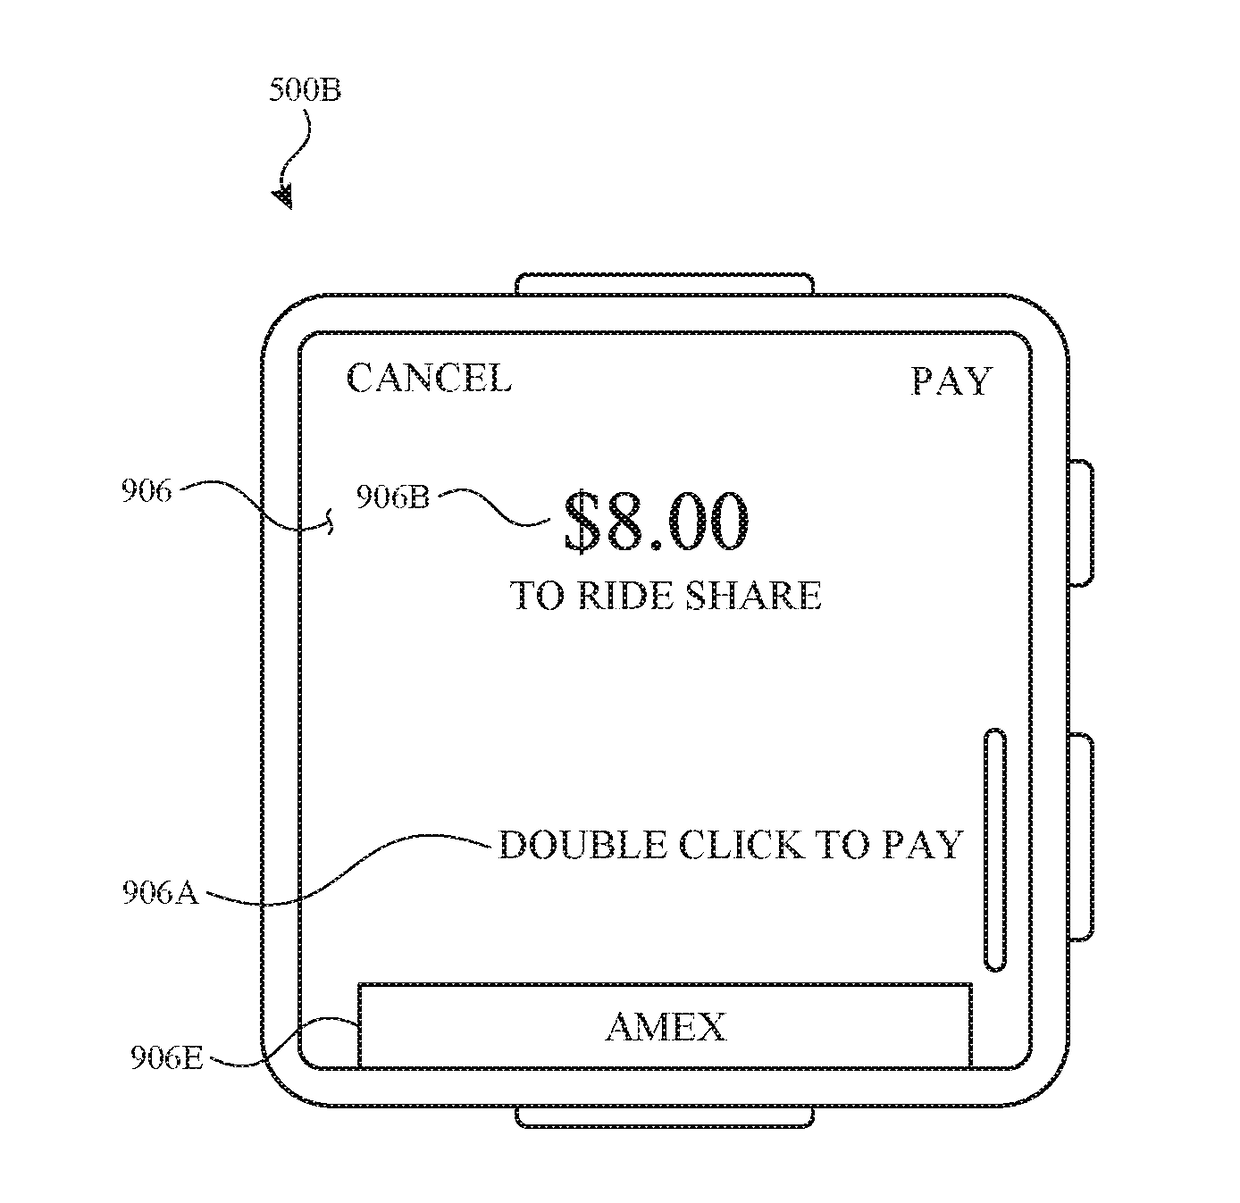 User interfaces for transactions